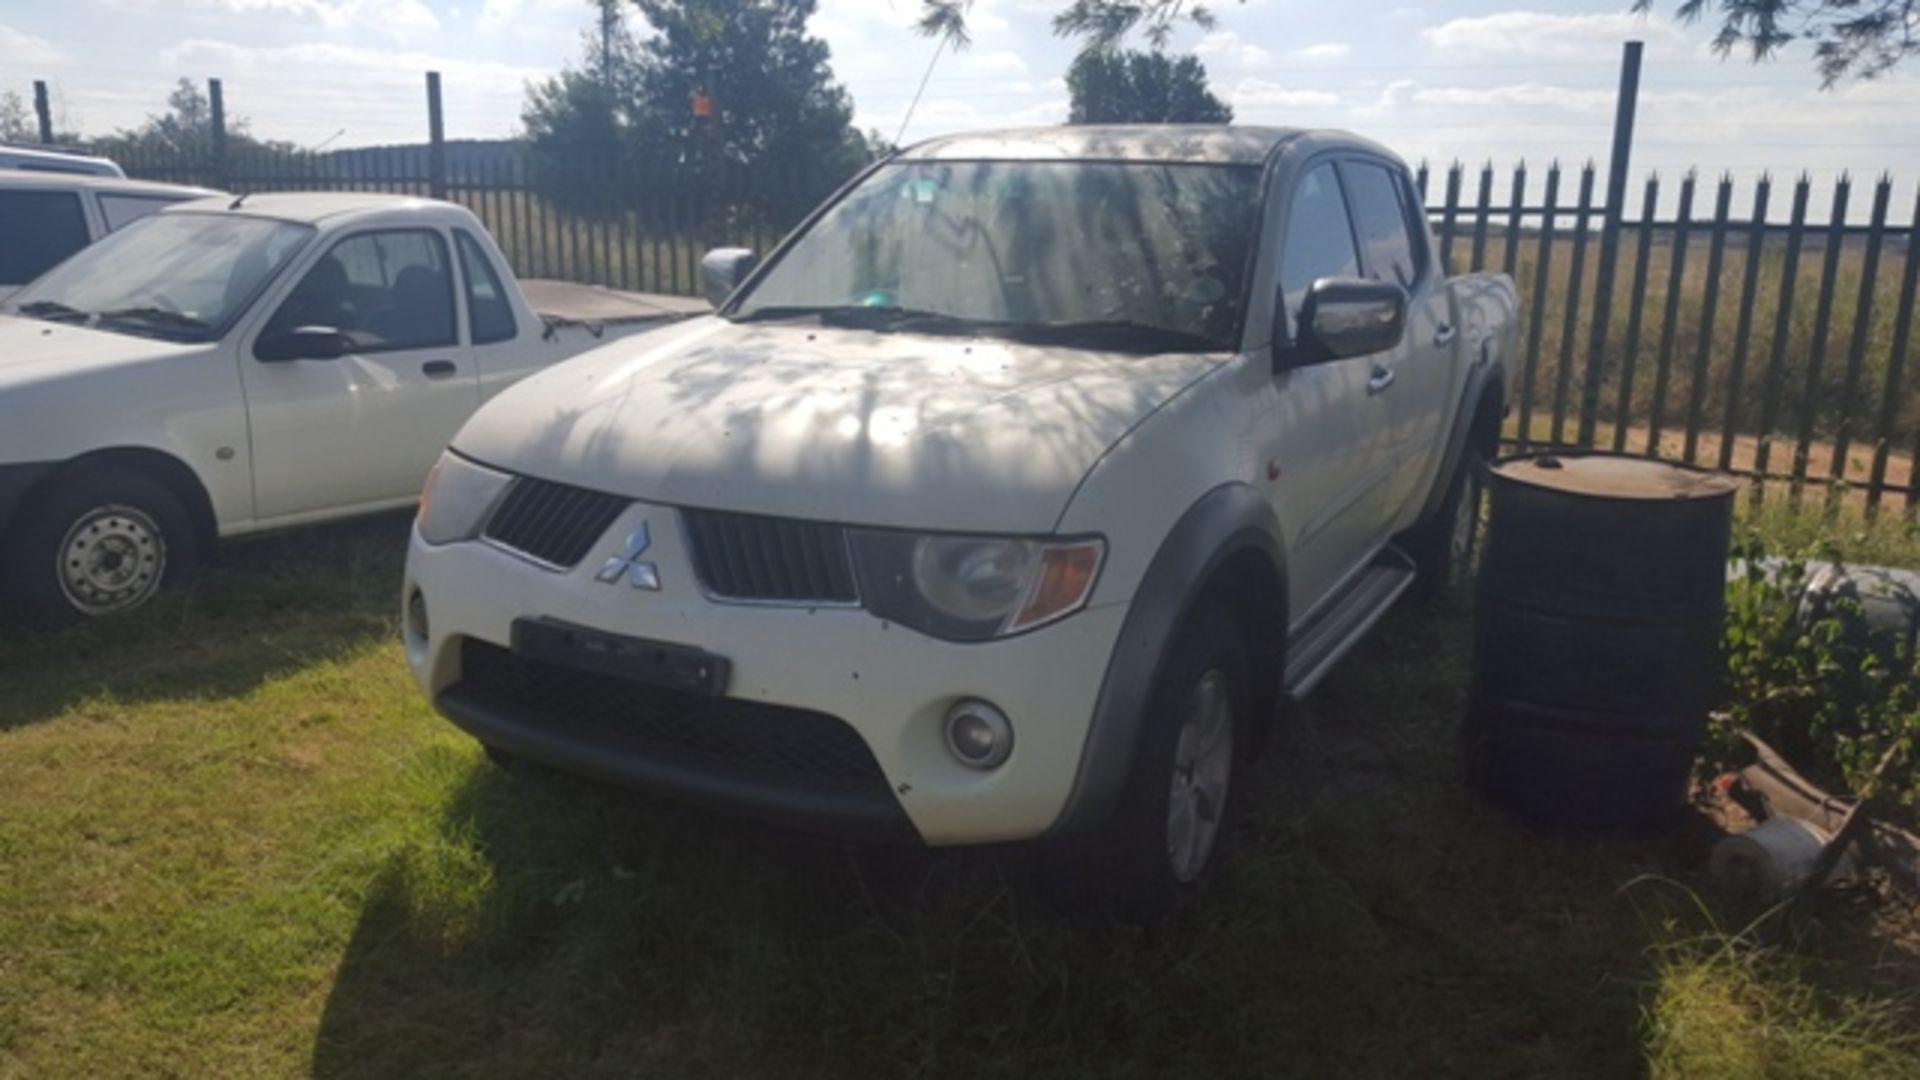 2008 MITSUBISHI TRITON 3.2 DI-D 4X4 A/T P/U D/C - RUNNER (SHANDUKA CENTRAL OFFICES, WITBANK) - Image 2 of 8